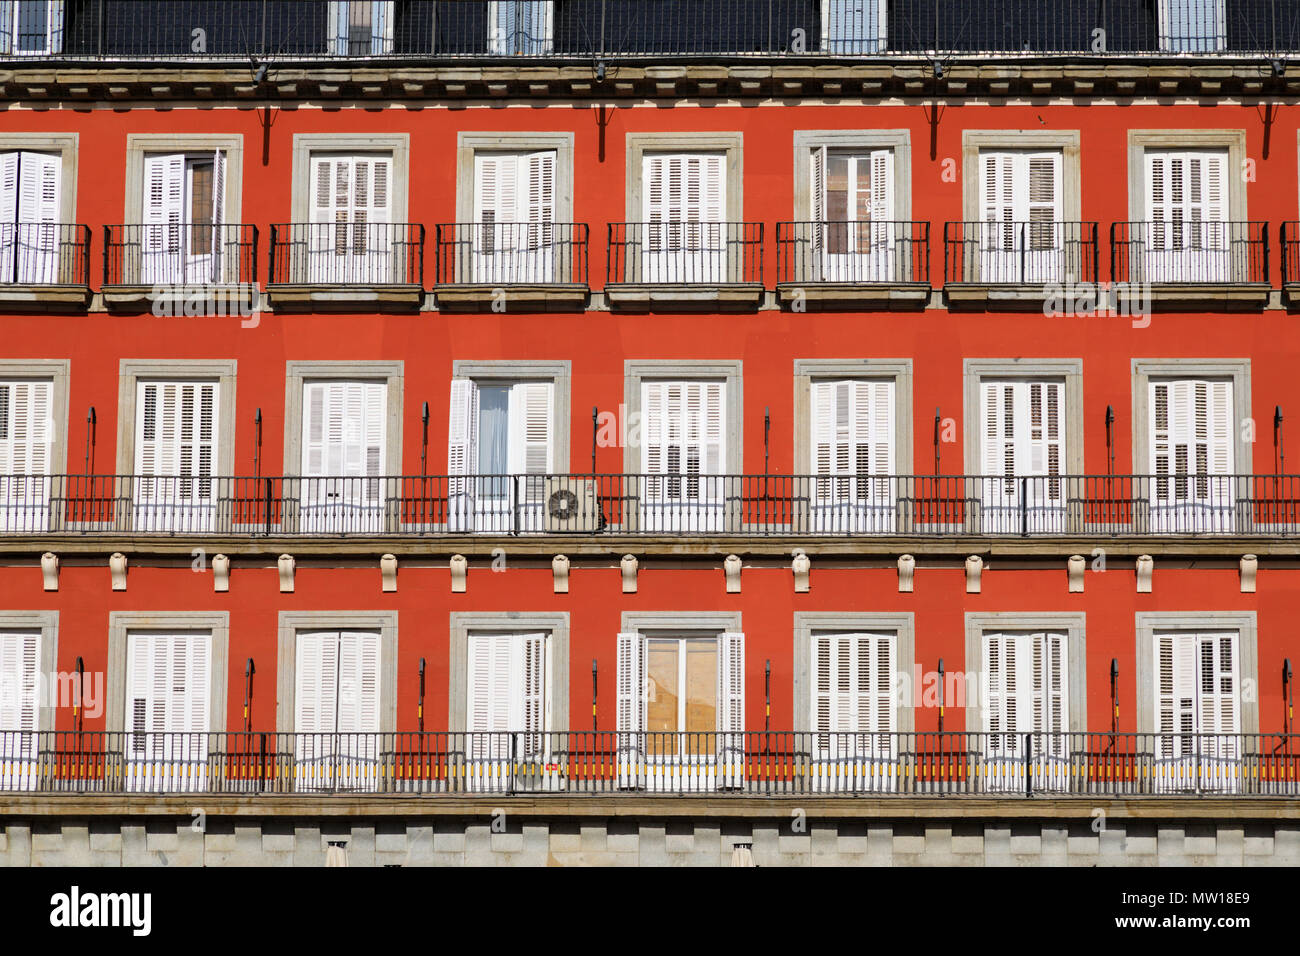 Detail from orange painted buildings in Plaza Mayor facade, Madrid, Spain. May 2018 Stock Photo